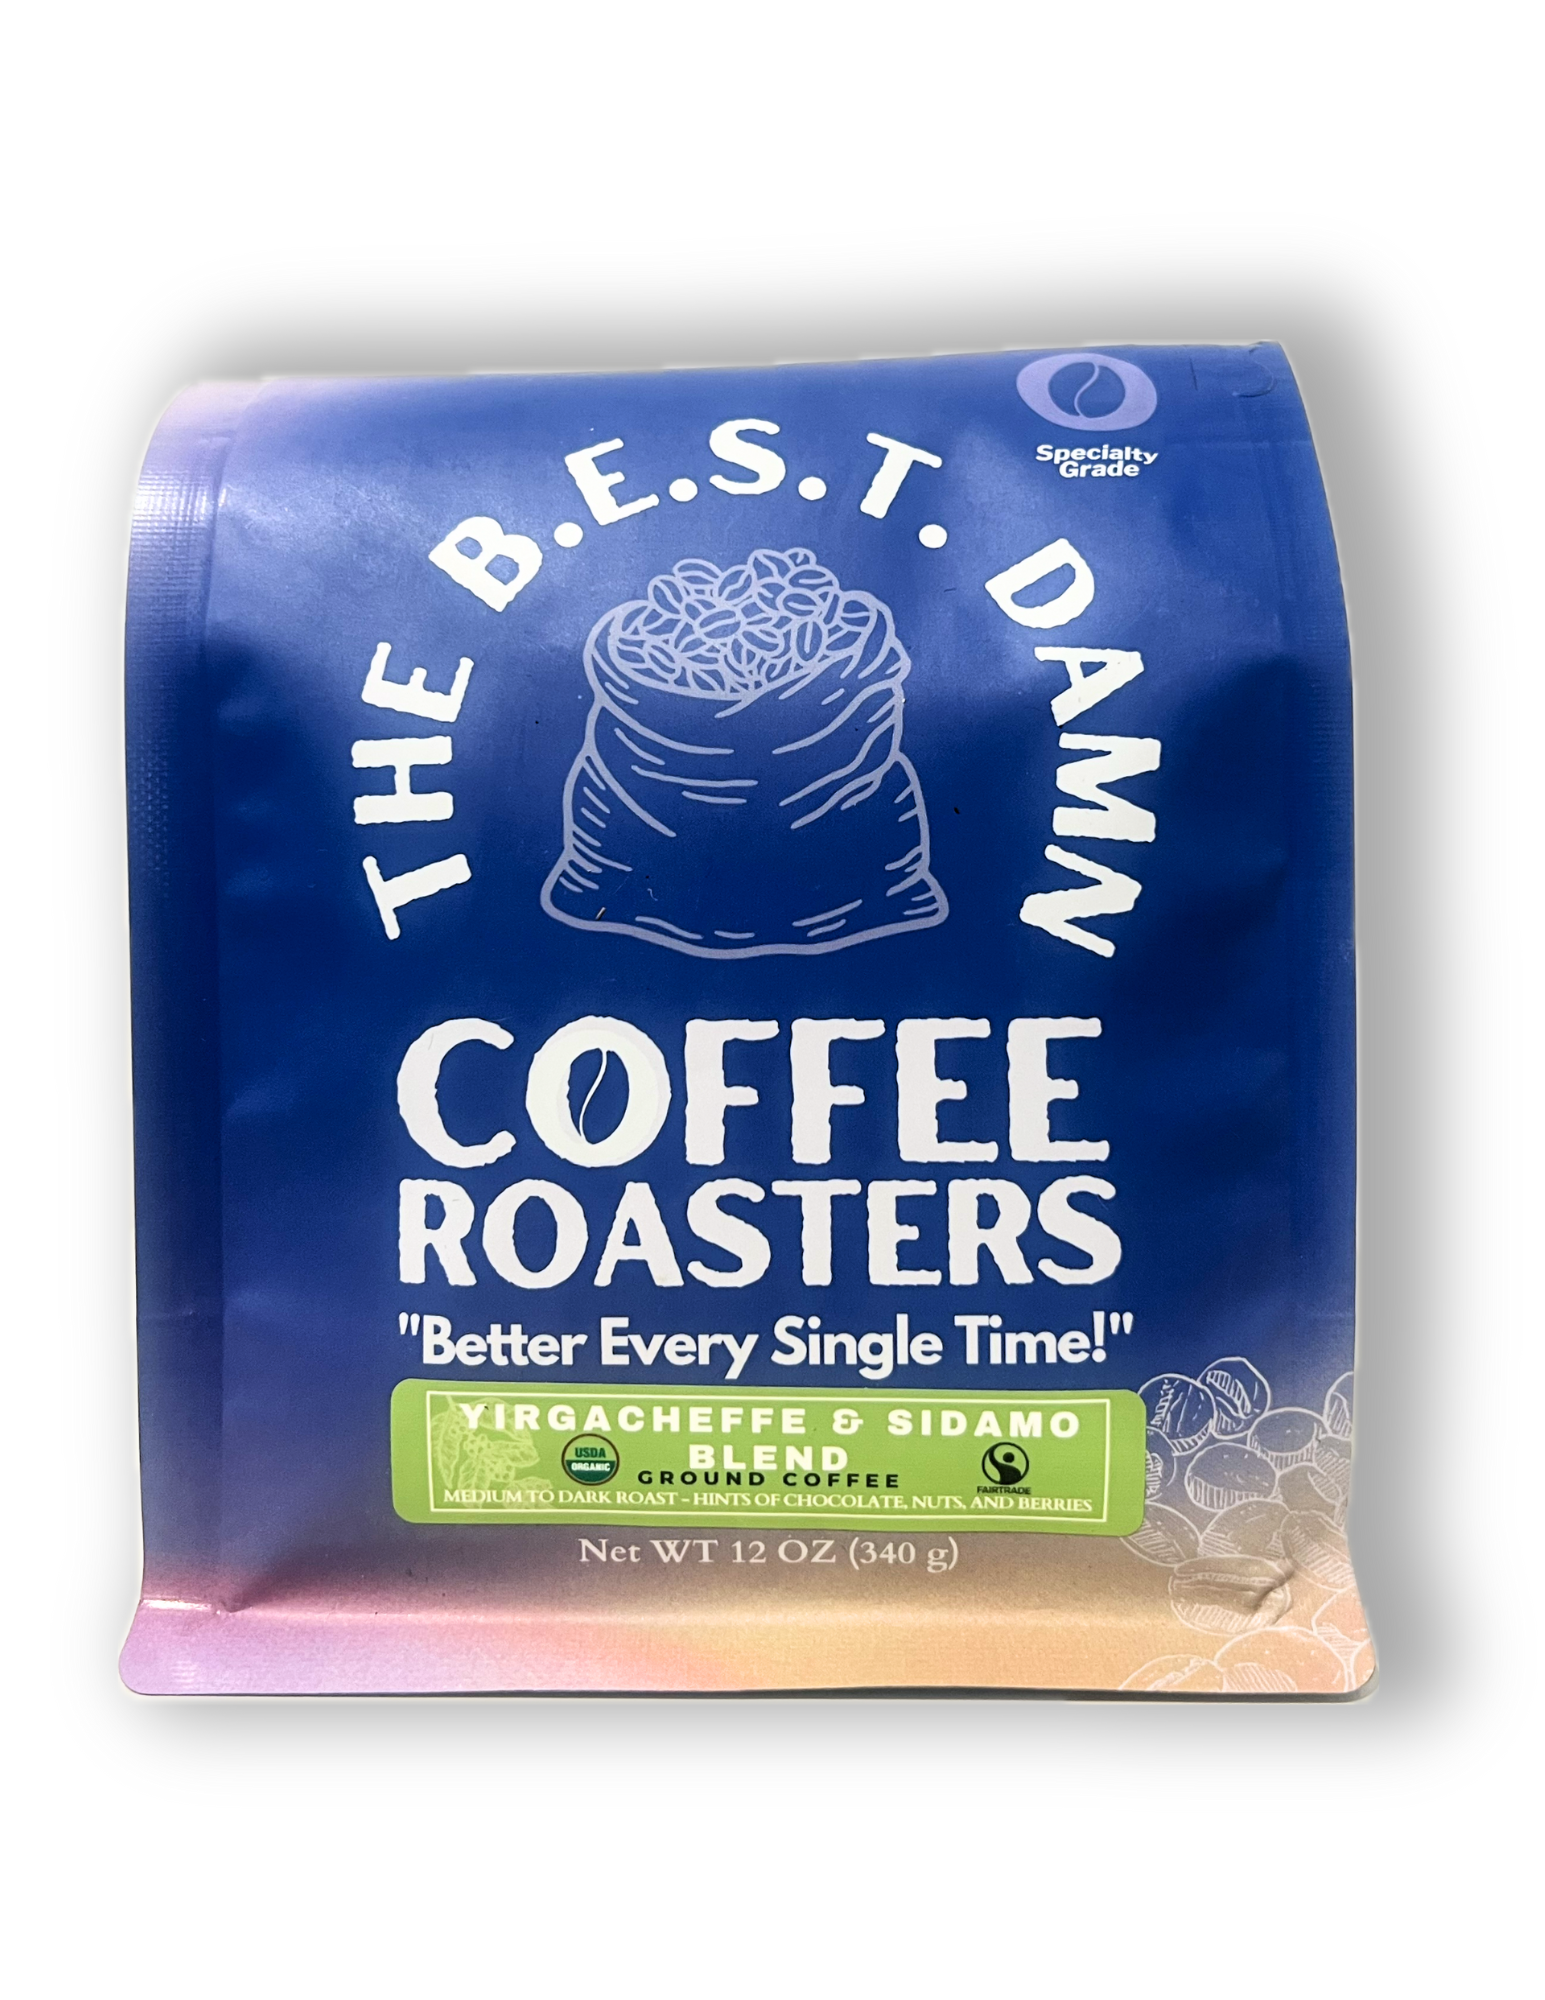 a bag of coffee roasters coffee on a white background